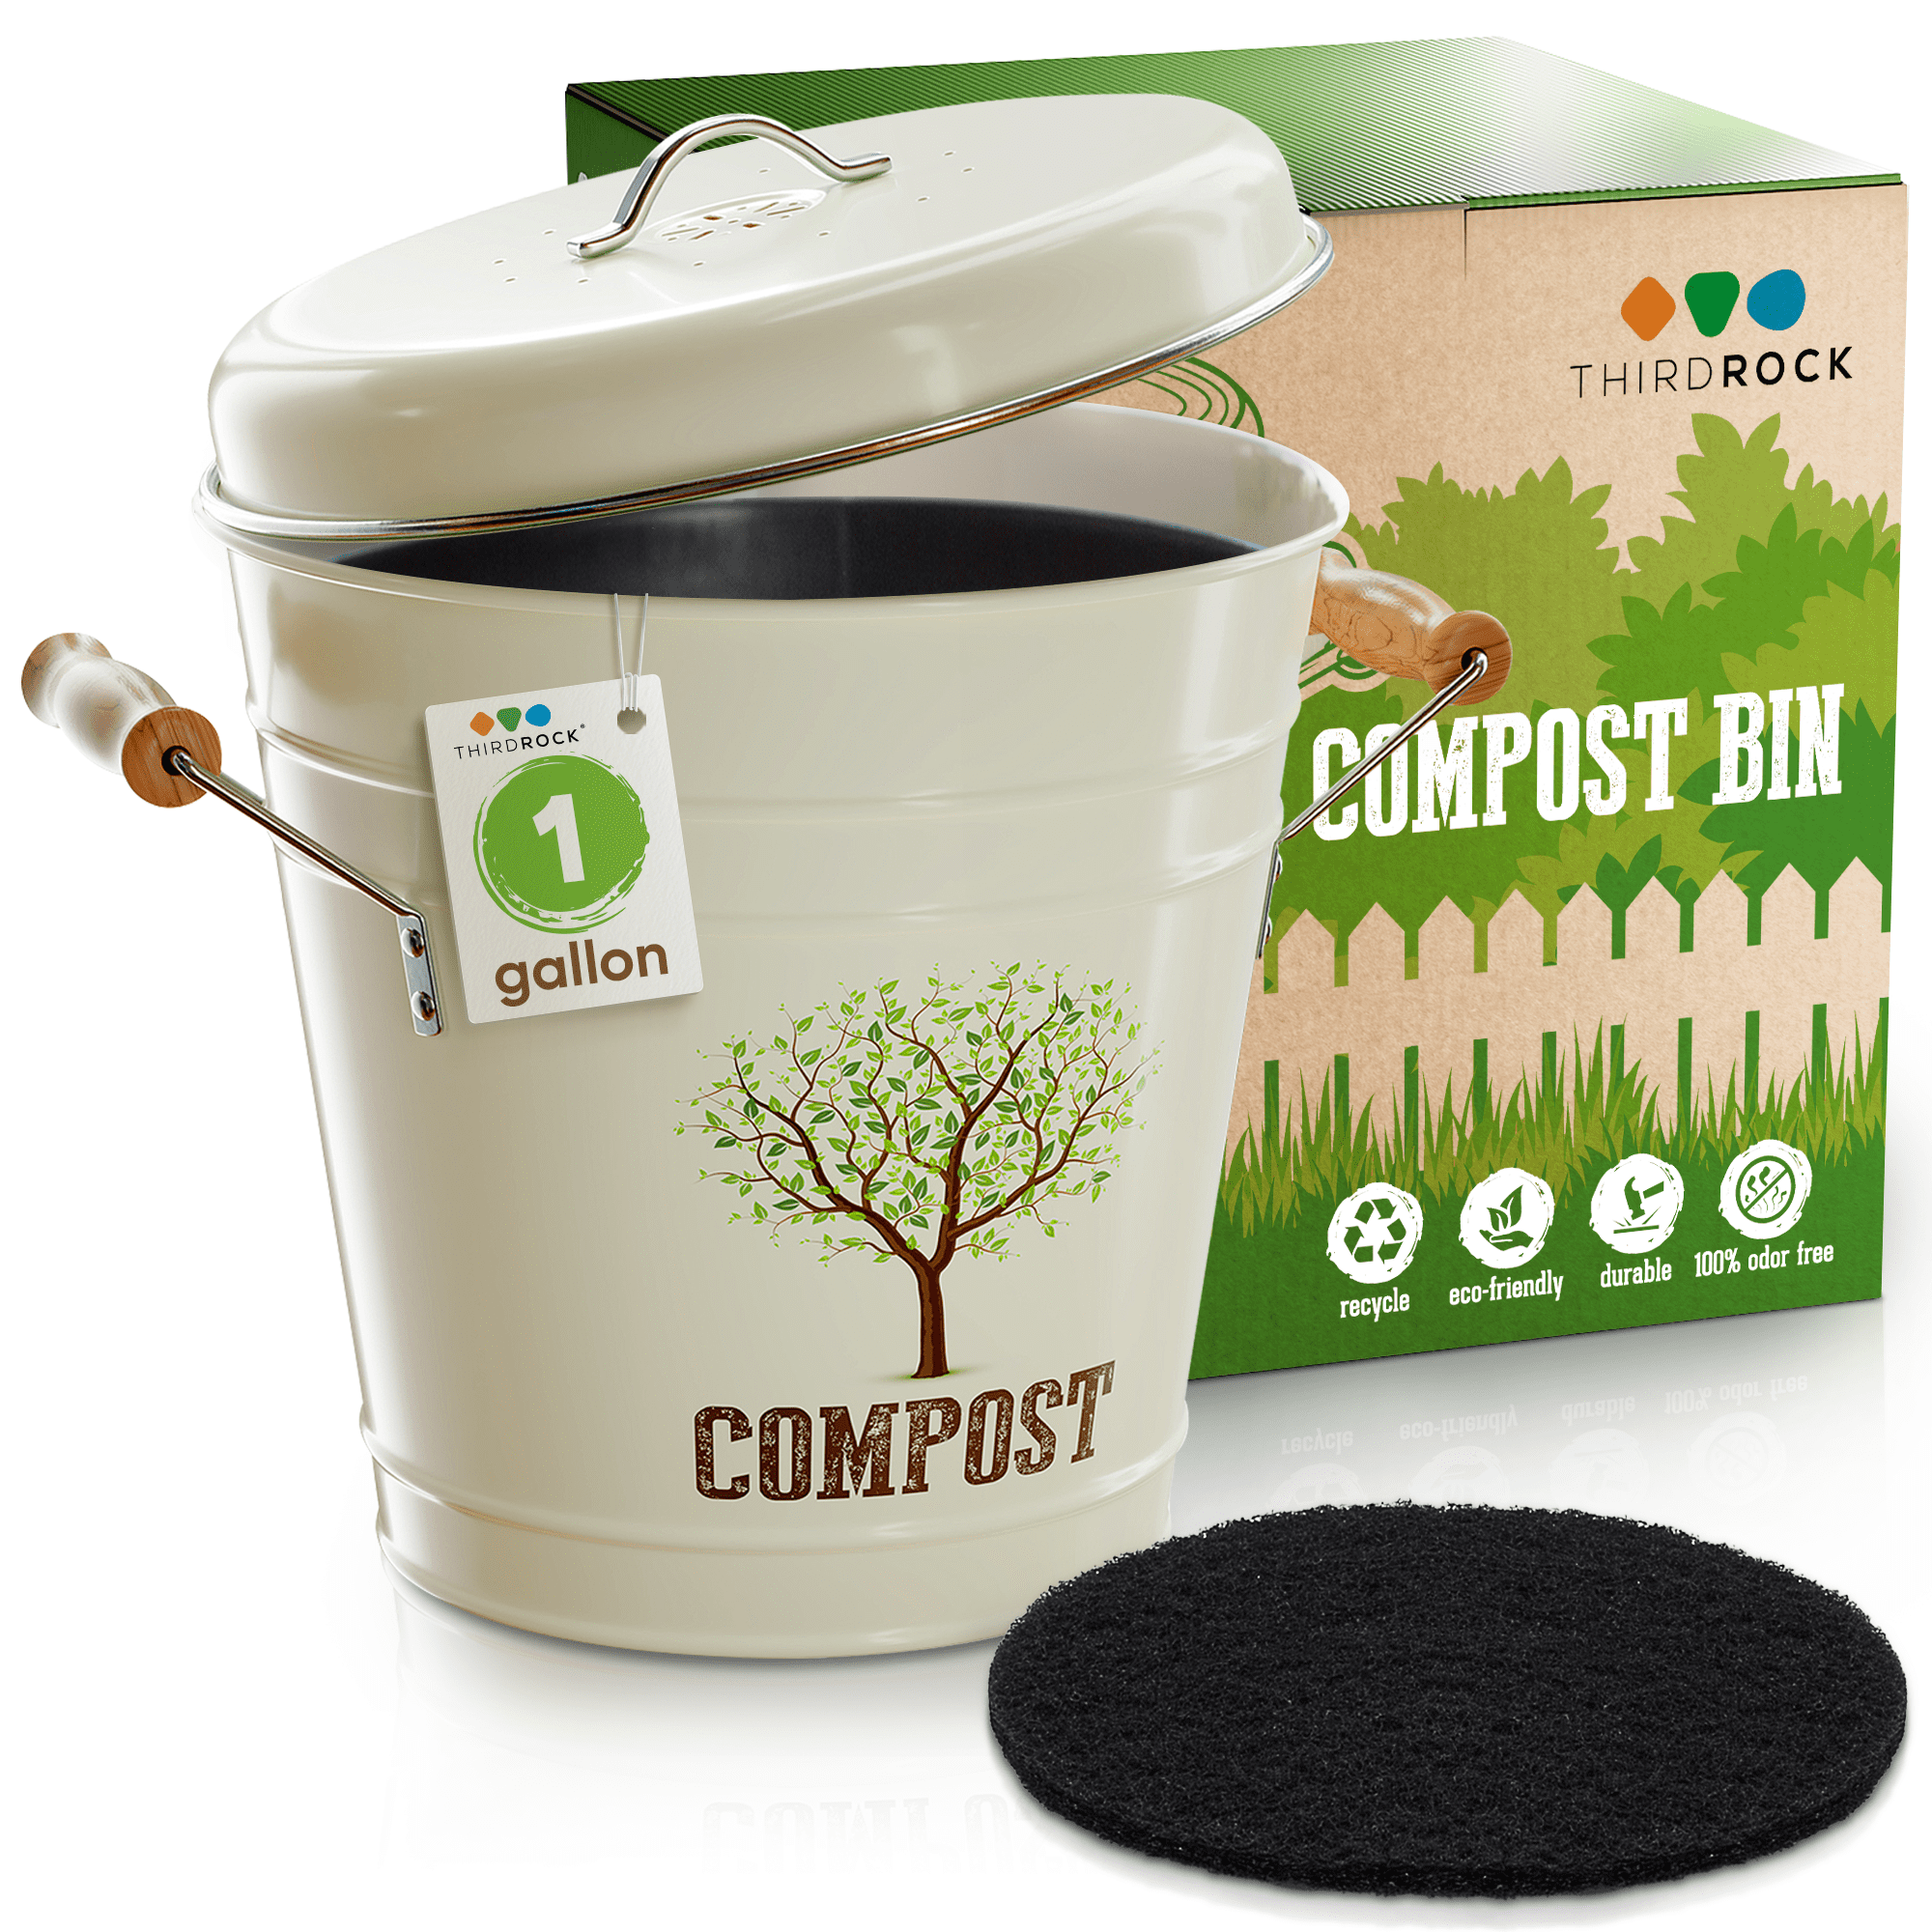 Third Rock Charcoal Filter Replacements for Kitchen Compost Bin - 12 Pack - 5.1 Inches in Diameter | Designed to Fit 1 Gallon Compost Bin | Premium